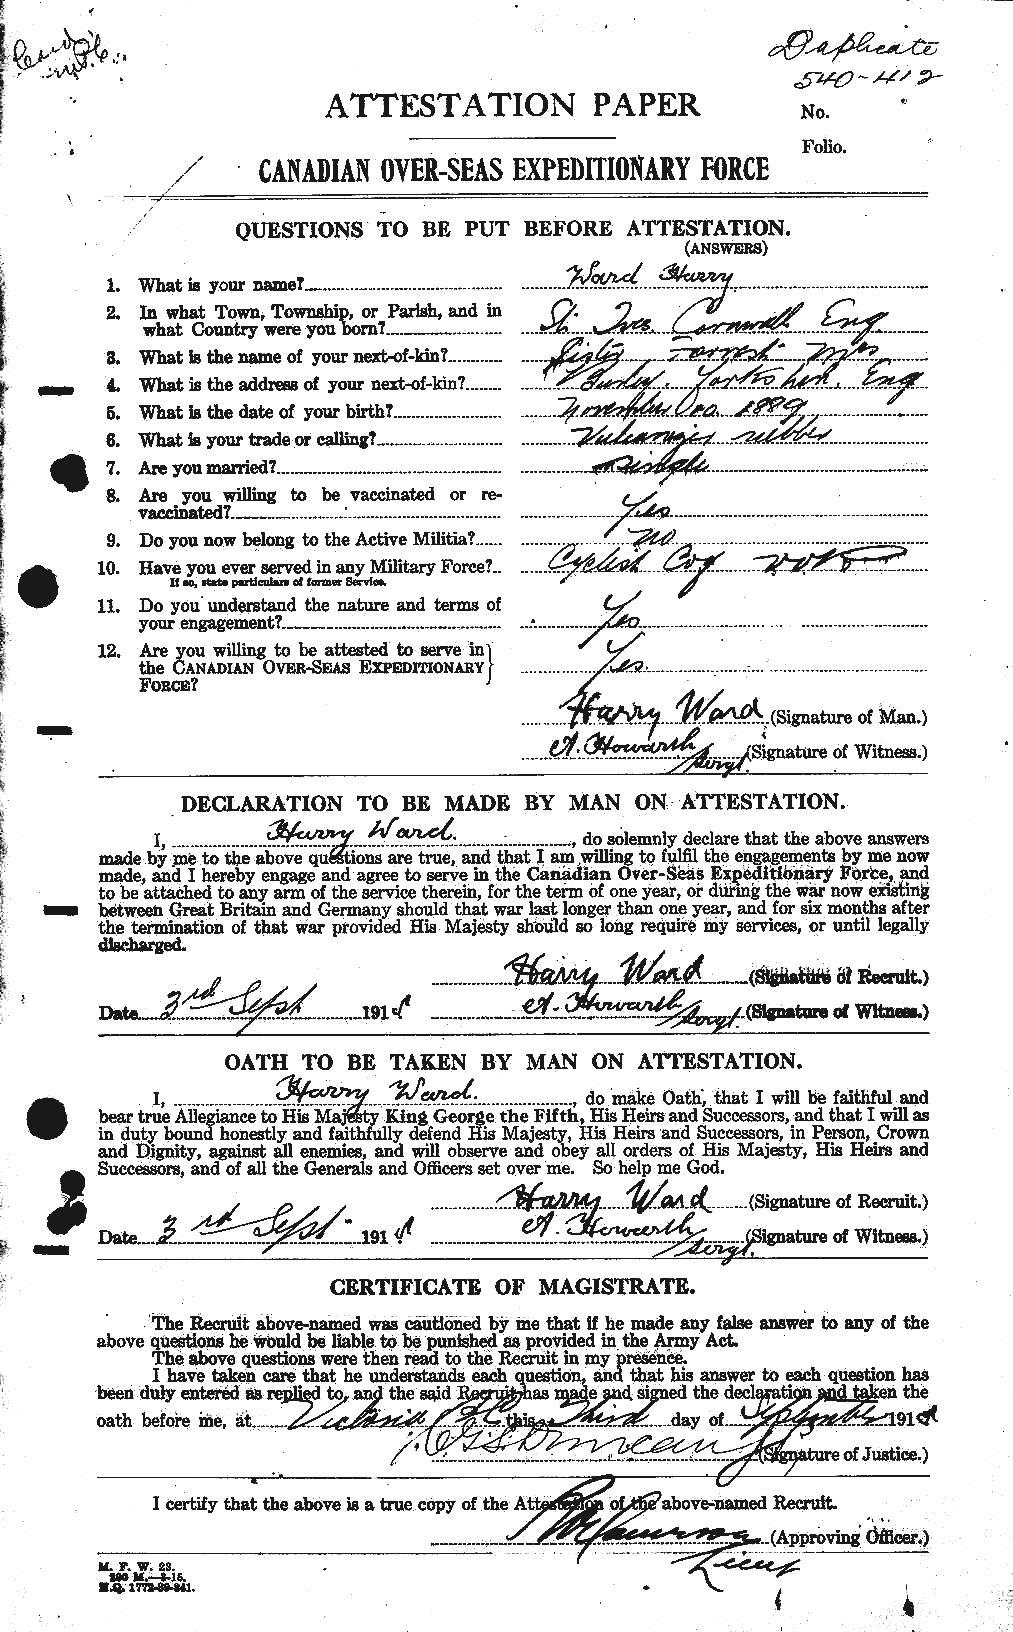 Personnel Records of the First World War - CEF 657808a